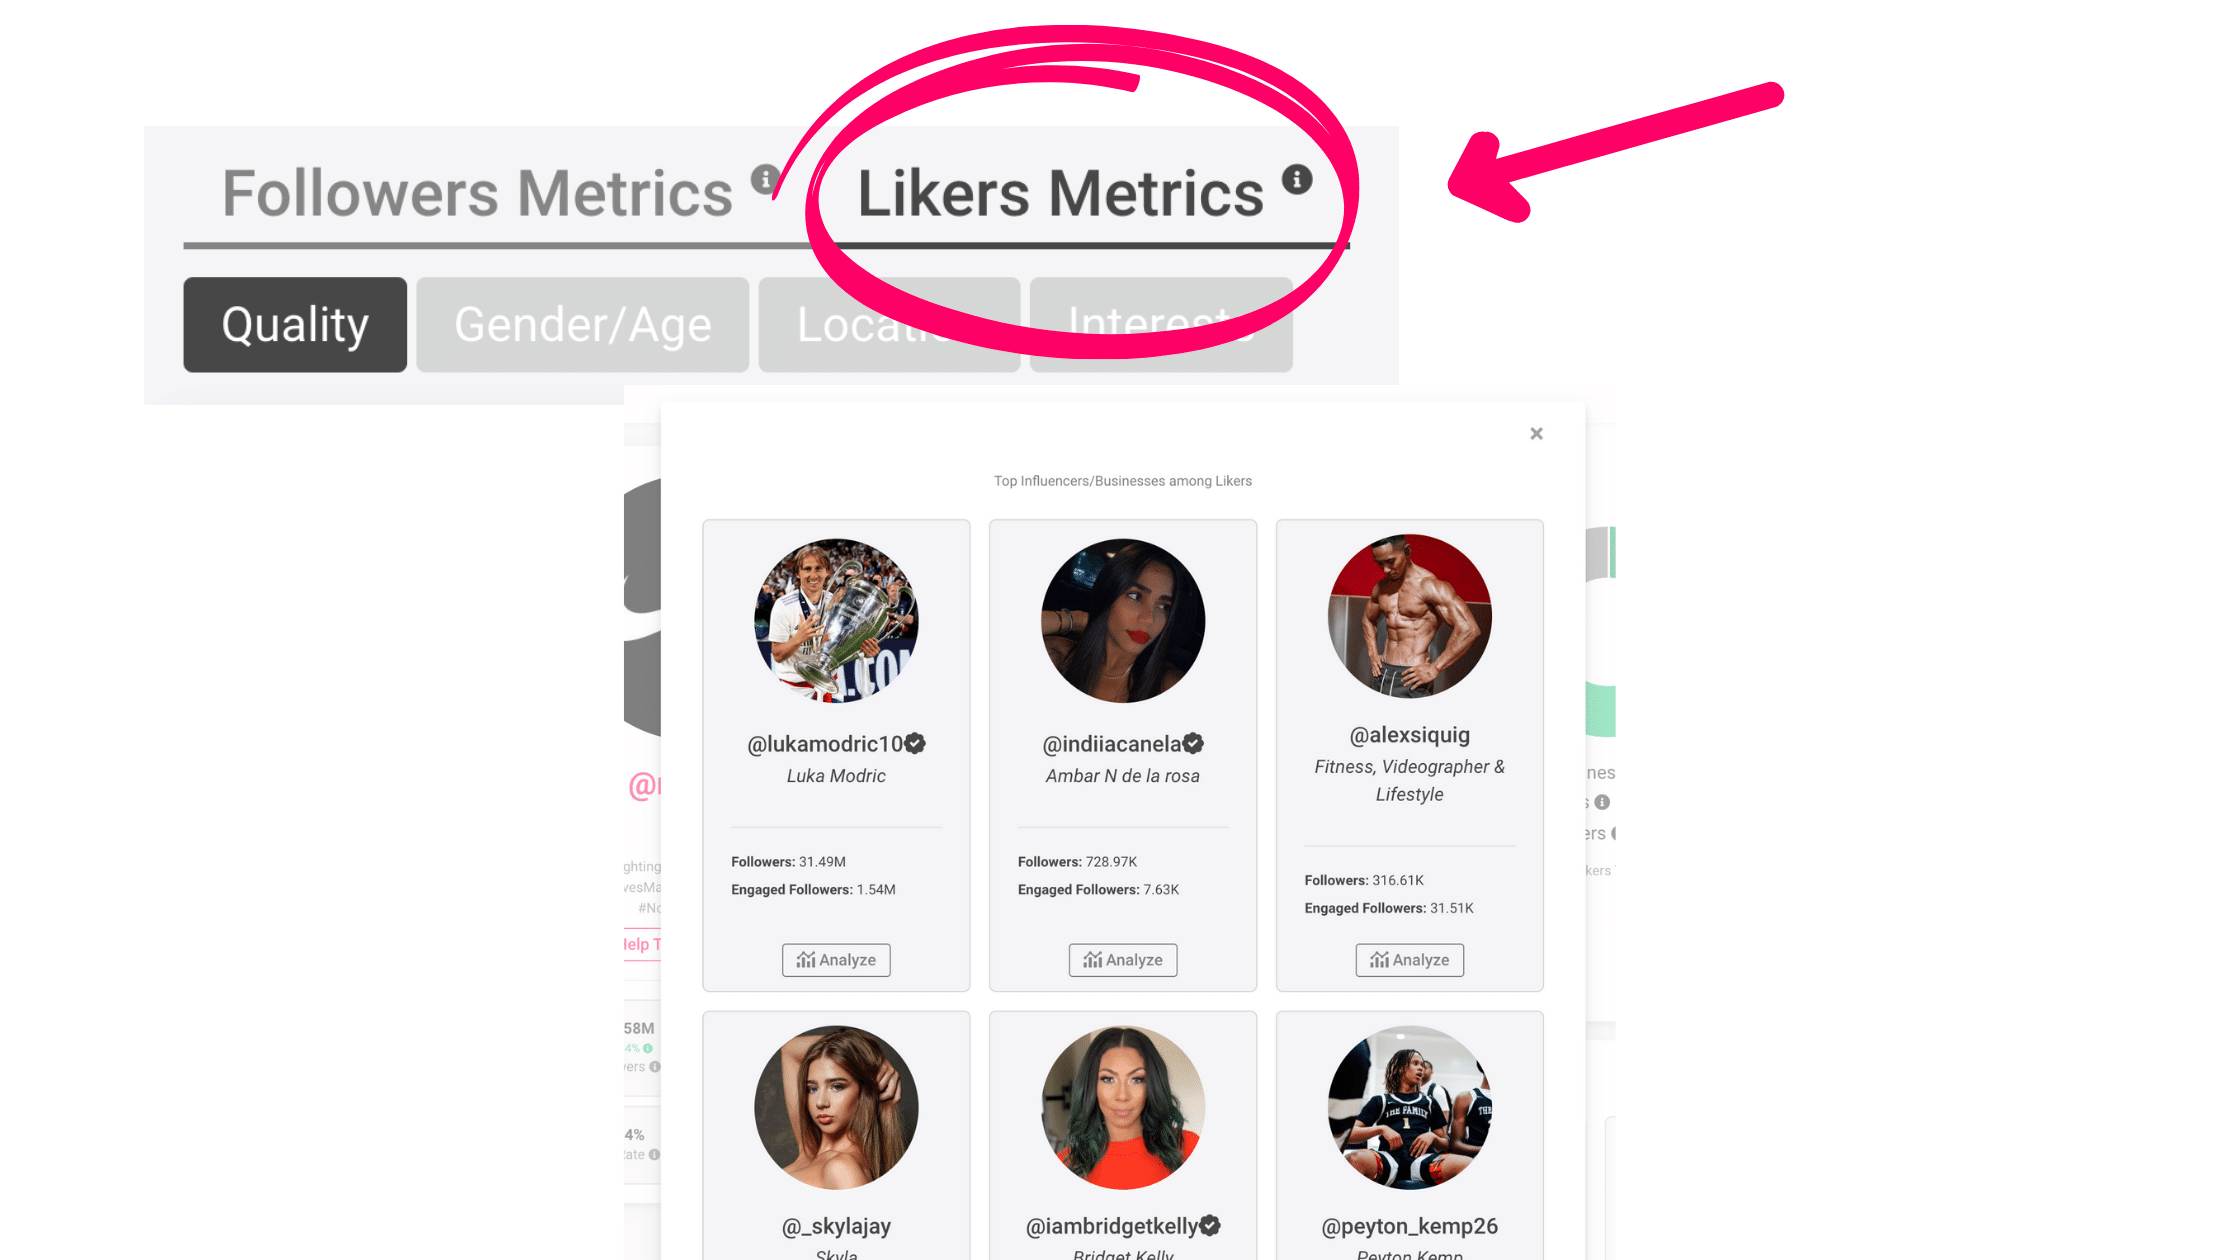 How to find influencers who liked the content of a brand on Instagram, using Click Analytic.